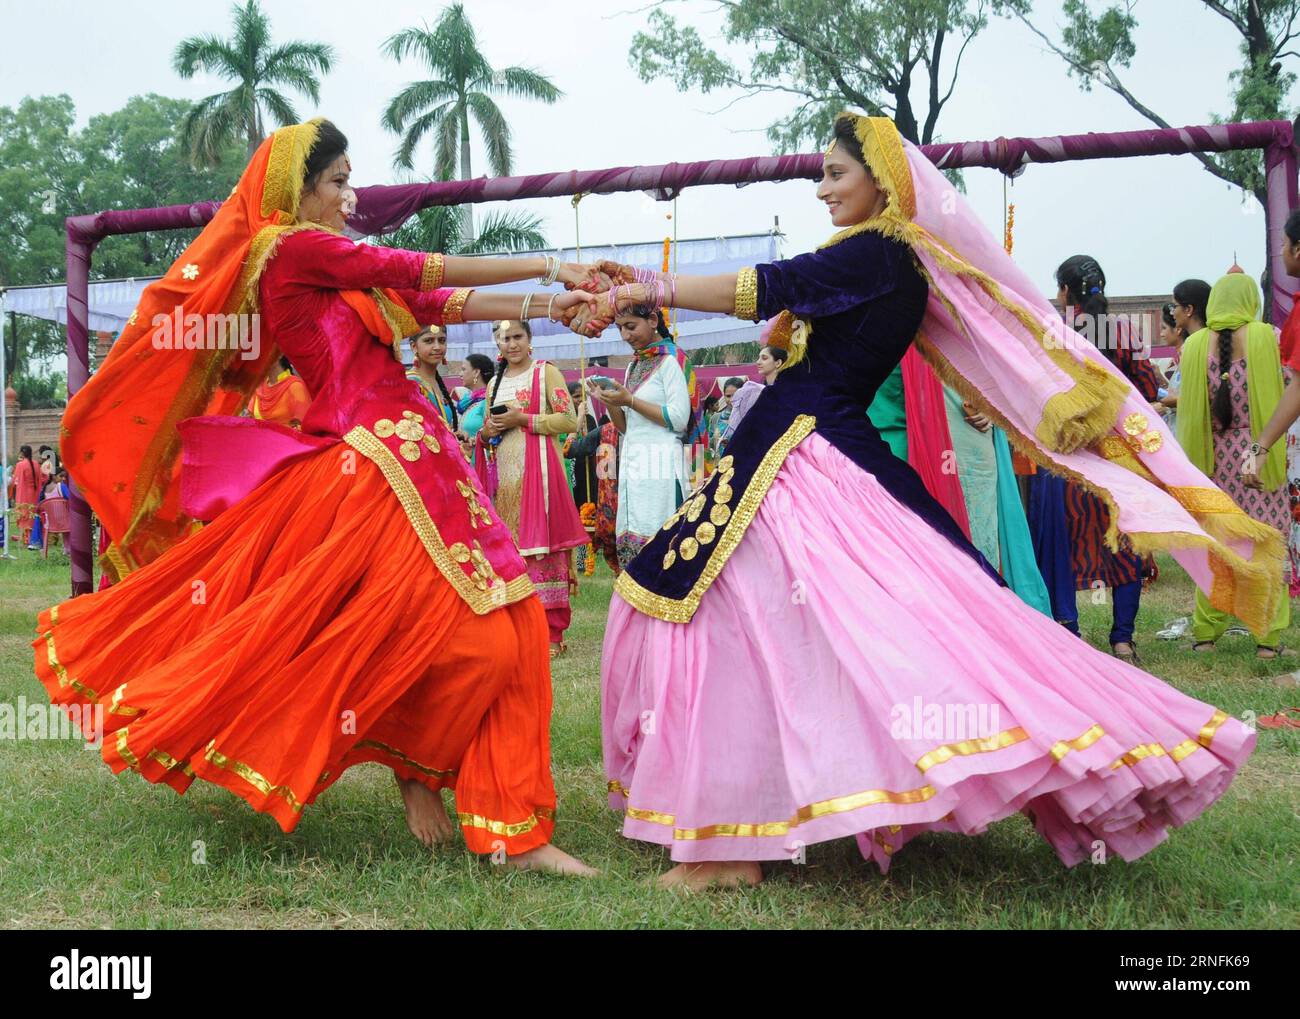 (160813) -- AMRITSAR (INDIA), Aug. 13, 2016 -- College girls wearing traditional Punjabi dresses dance during the celebration of Teej Festival in Amritsar, India, Aug. 13, 2016. Teej is a generic name for a number of festivals celebrated among females to welcome monsoon season in northern and western India and Nepal. ) (wtc) INDIA-AMRITSAR-TEEJ FESTIVAL-CELEBRATION stringer PUBLICATIONxNOTxINxCHN   160813 Amritsar India Aug 13 2016 College Girls Wearing Traditional Punjabi Dresses Dance during The Celebration of Teej Festival in Amritsar India Aug 13 2016 Teej IS a generic Name for a Number of Stock Photo